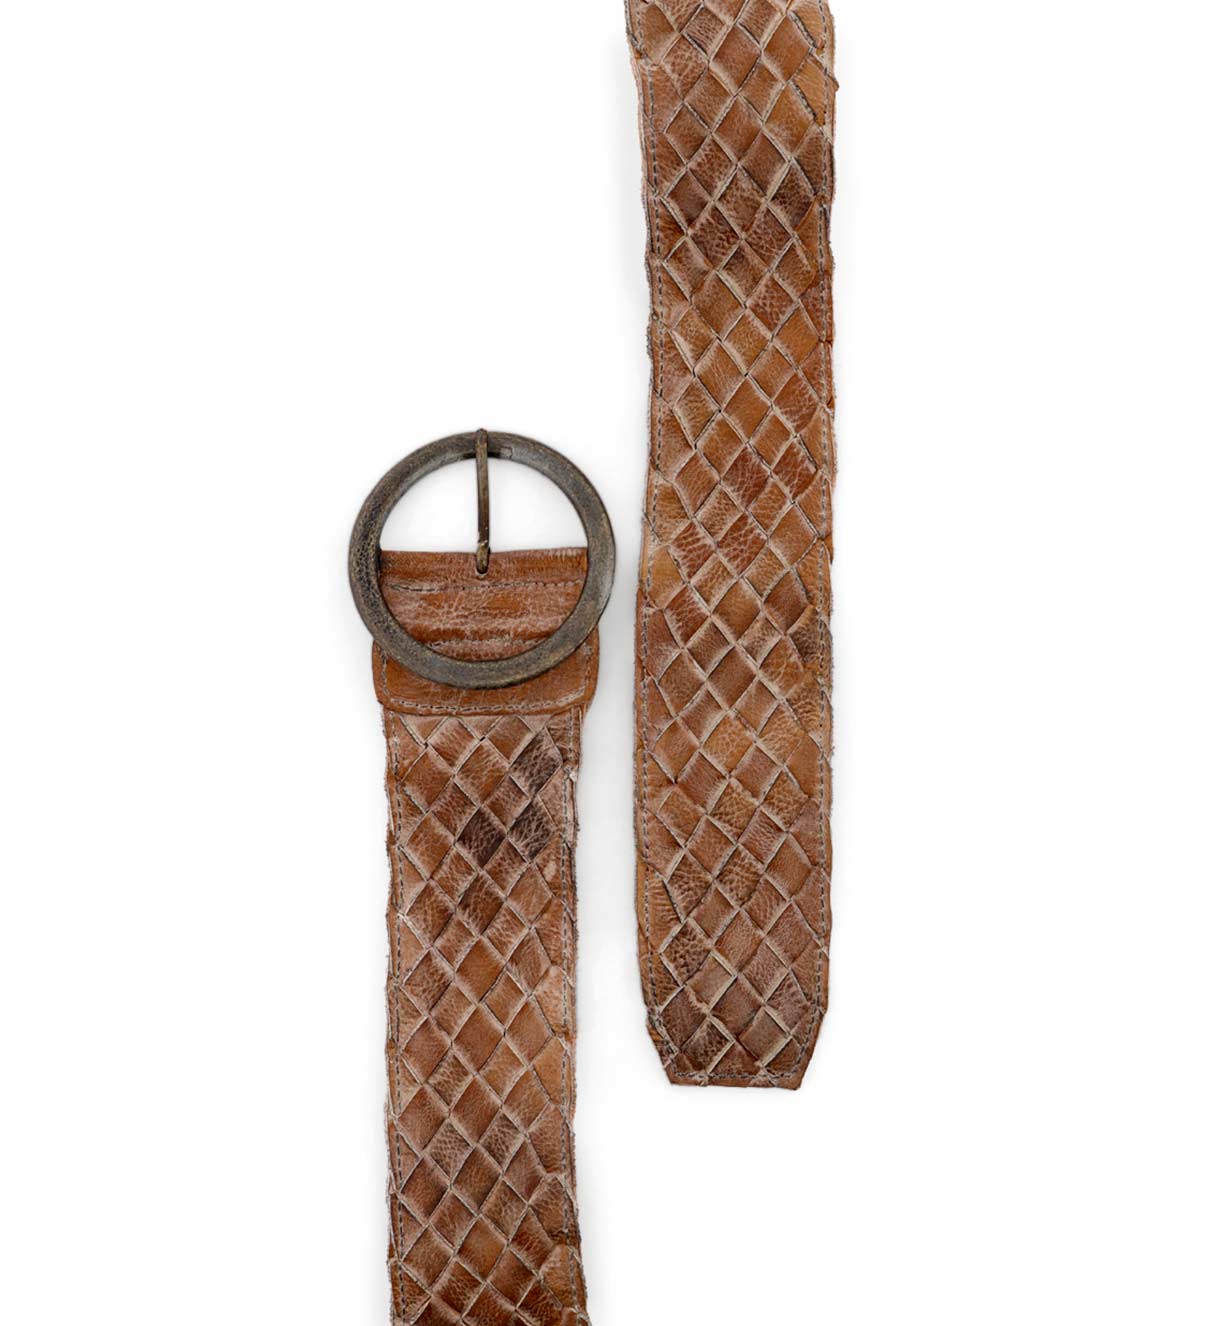 A Dreamweaver brown leather belt with a metal buckle from Bed Stu.